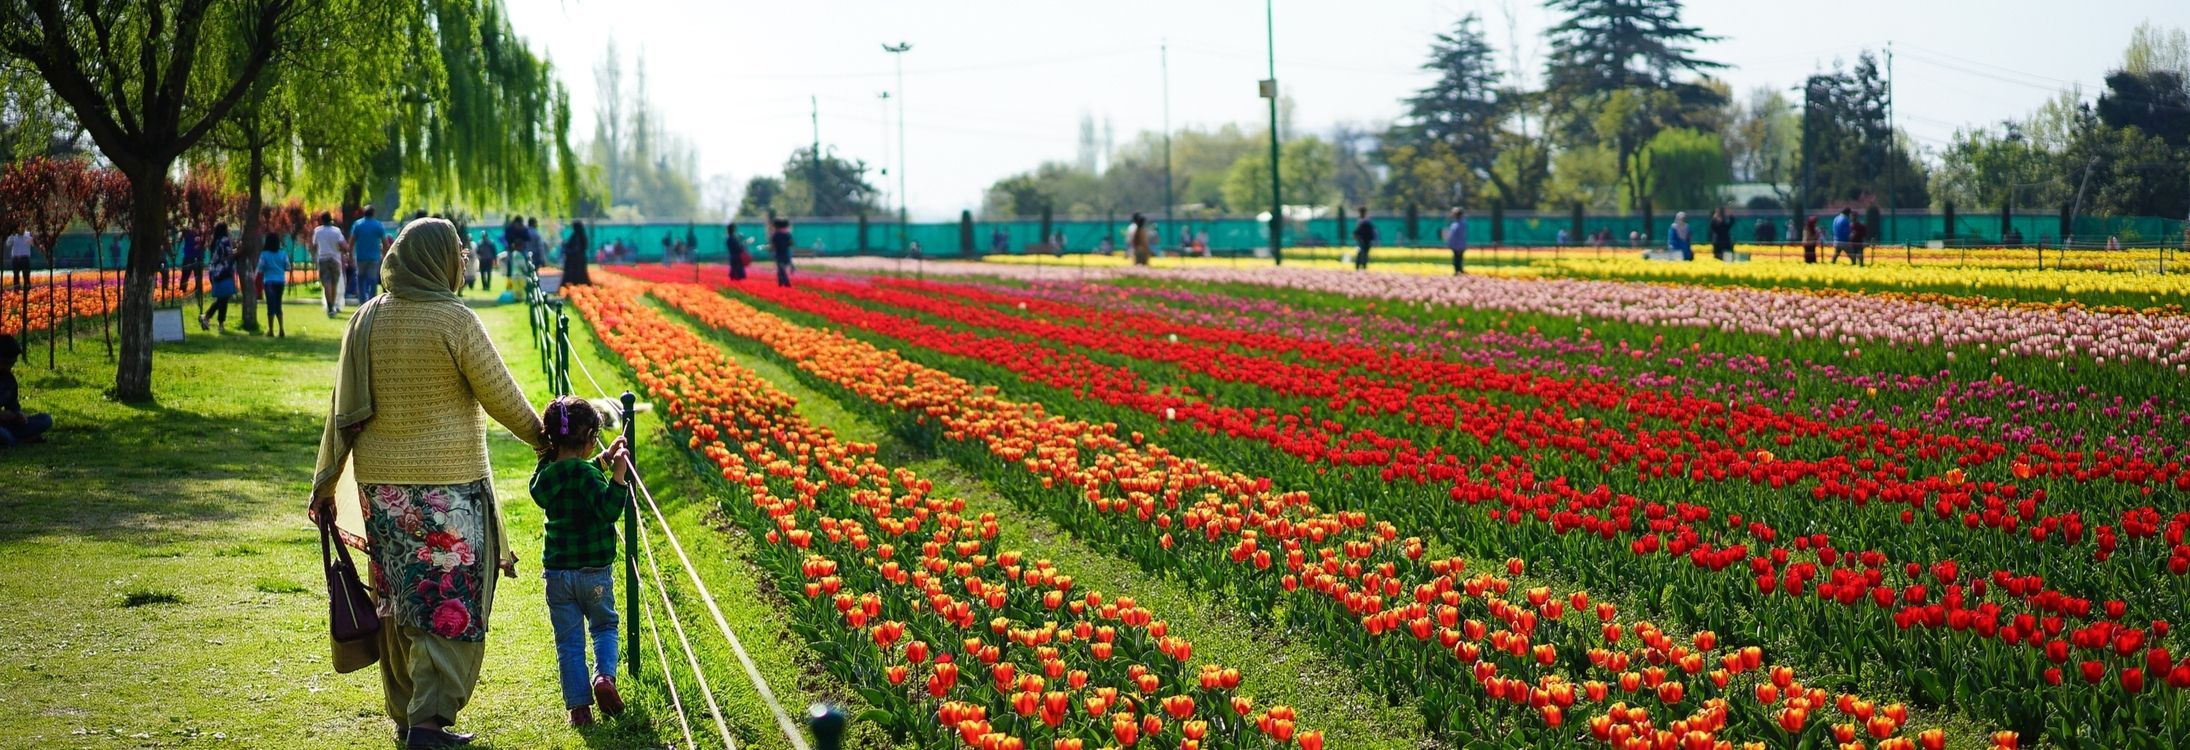 Places in India where there are more flowers than people